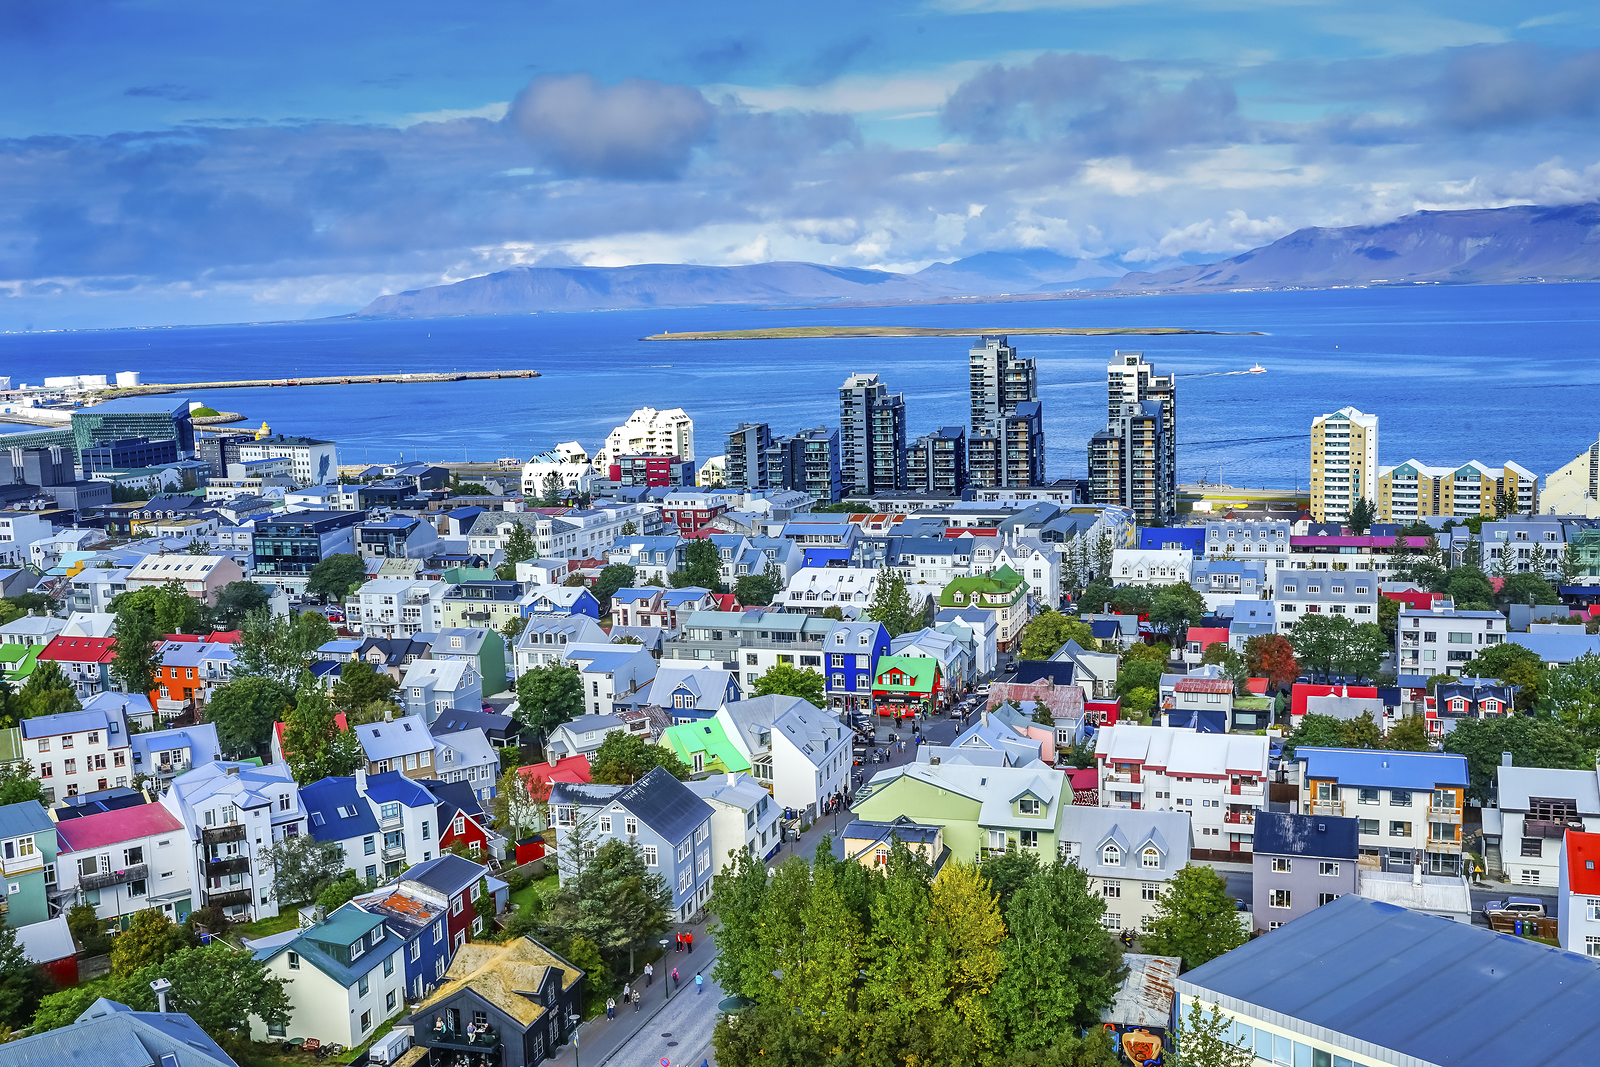 A vibrant city panorama showcasing an array of colorful buildings with a backdrop of blue sea and mountains under a partly cloudy sky